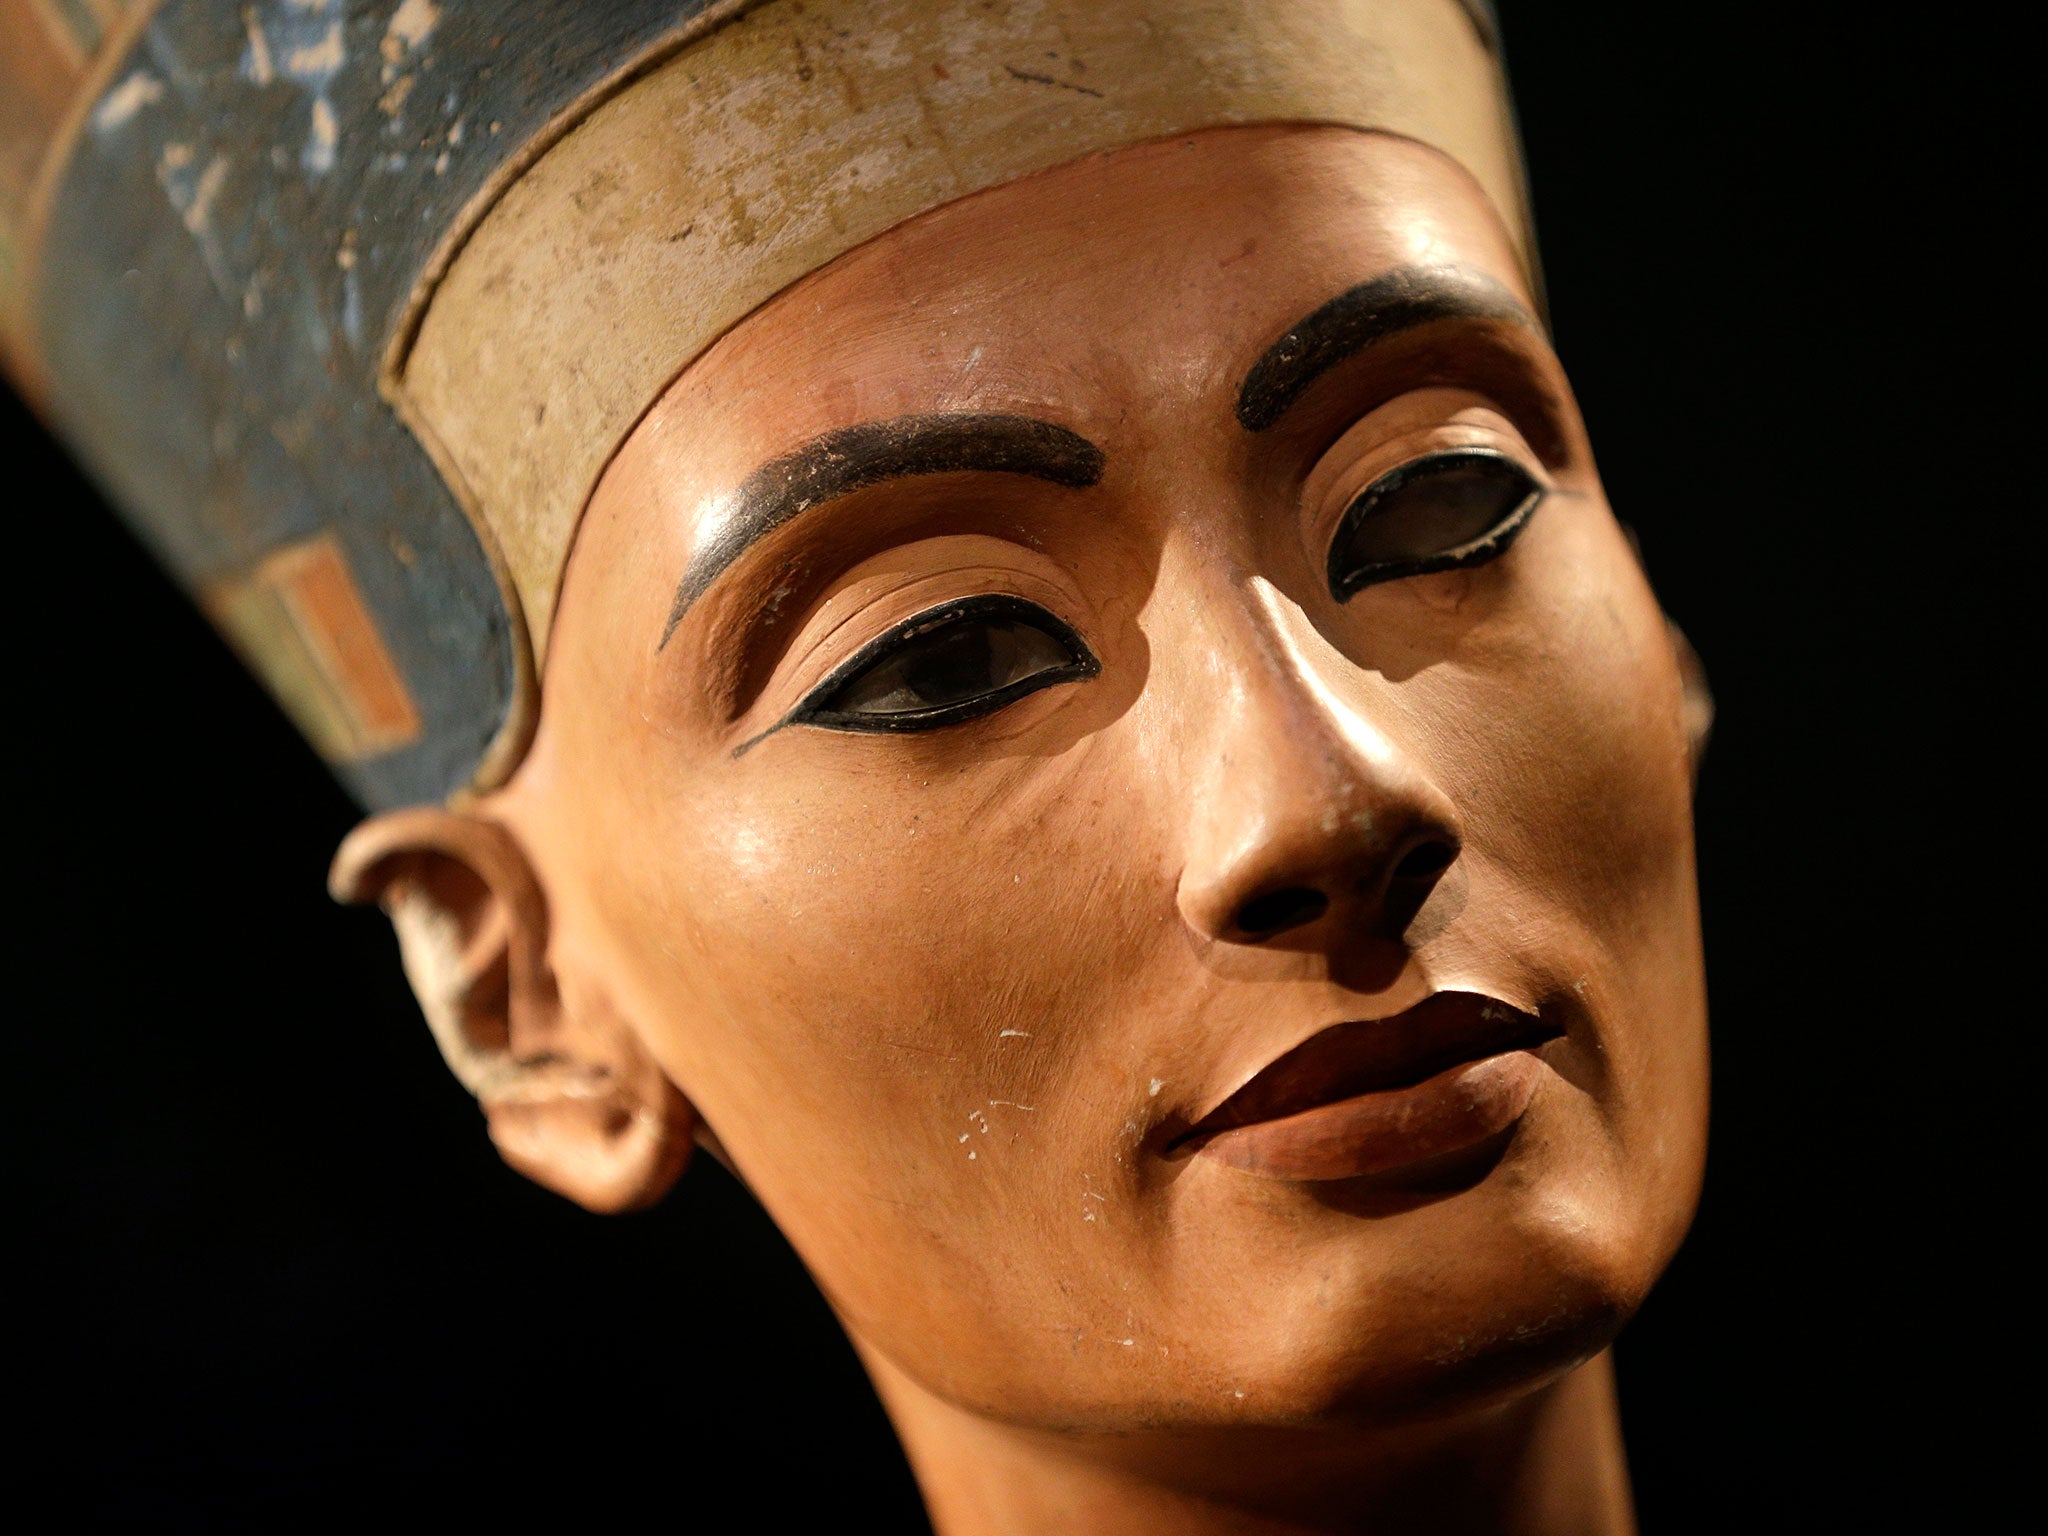 The Nefertiti bust is pictured during a press preview of the exhibition 'In The Light Of Amarna' to mark the 100 years of the Nefertiti bust discovery at the Neues Museum (New Museum) in Berlin, on December 5, 2012